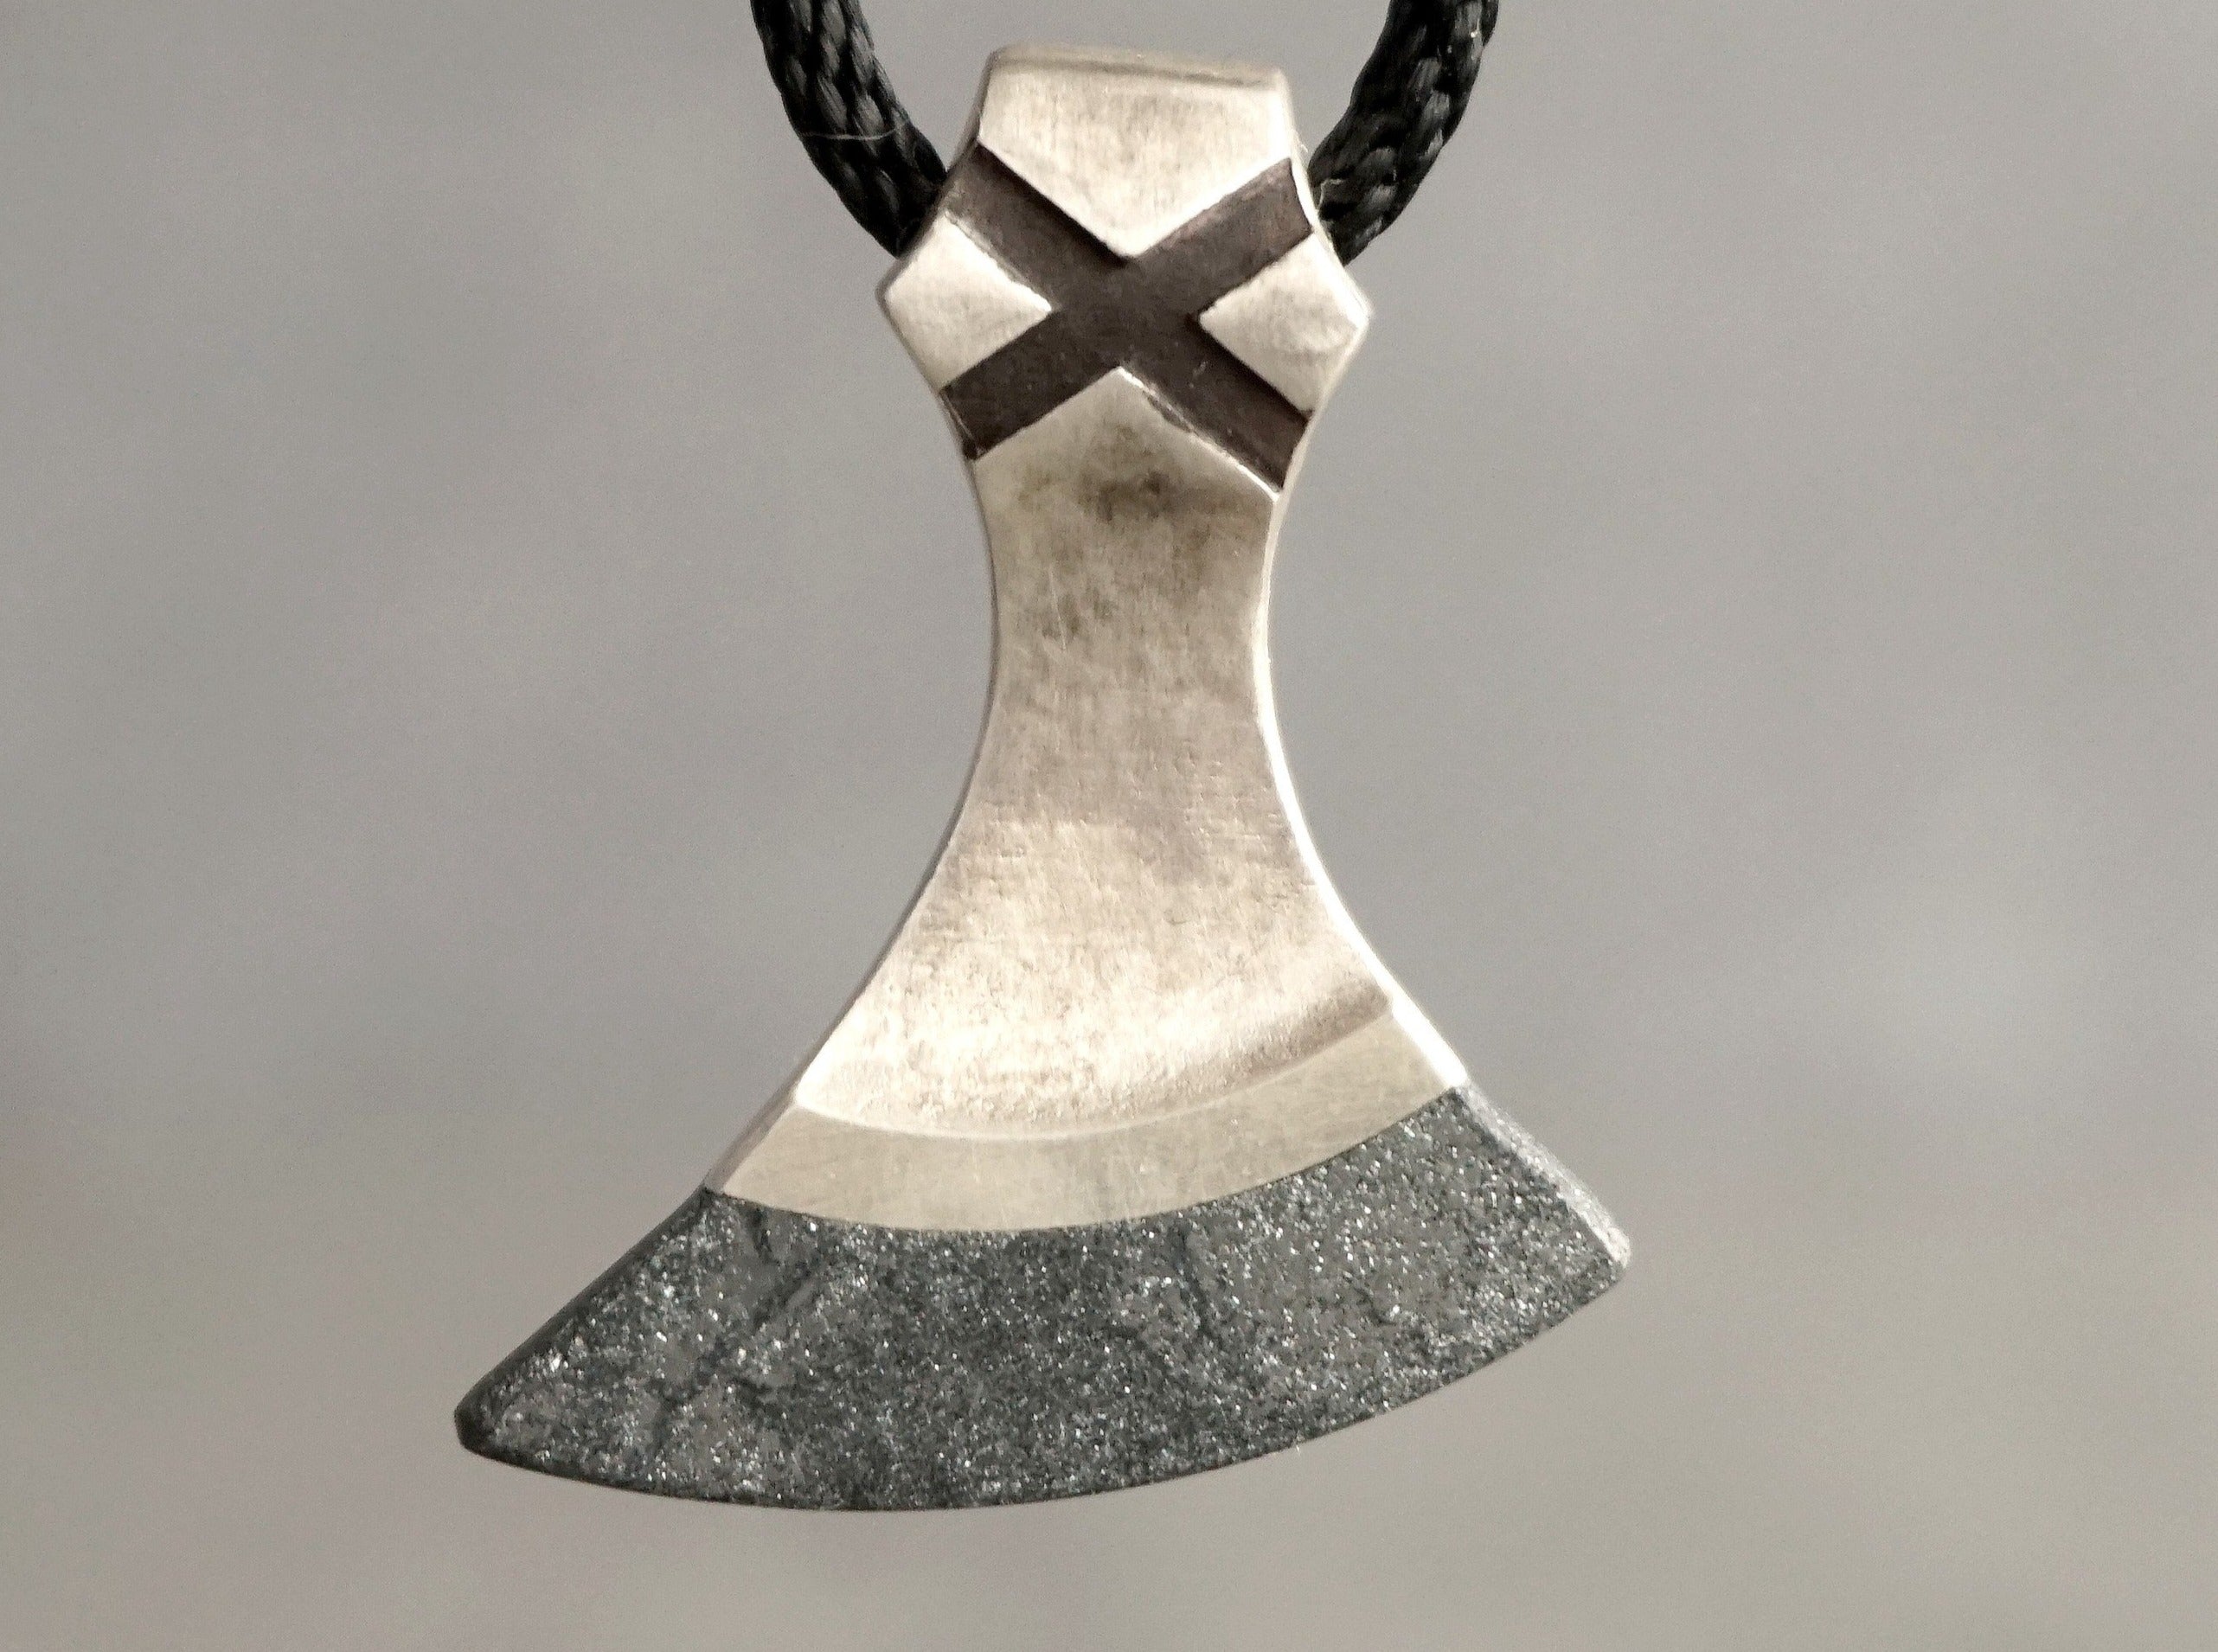 handmade axe necklace made of silver and specular hematite hanging on a cord necklace